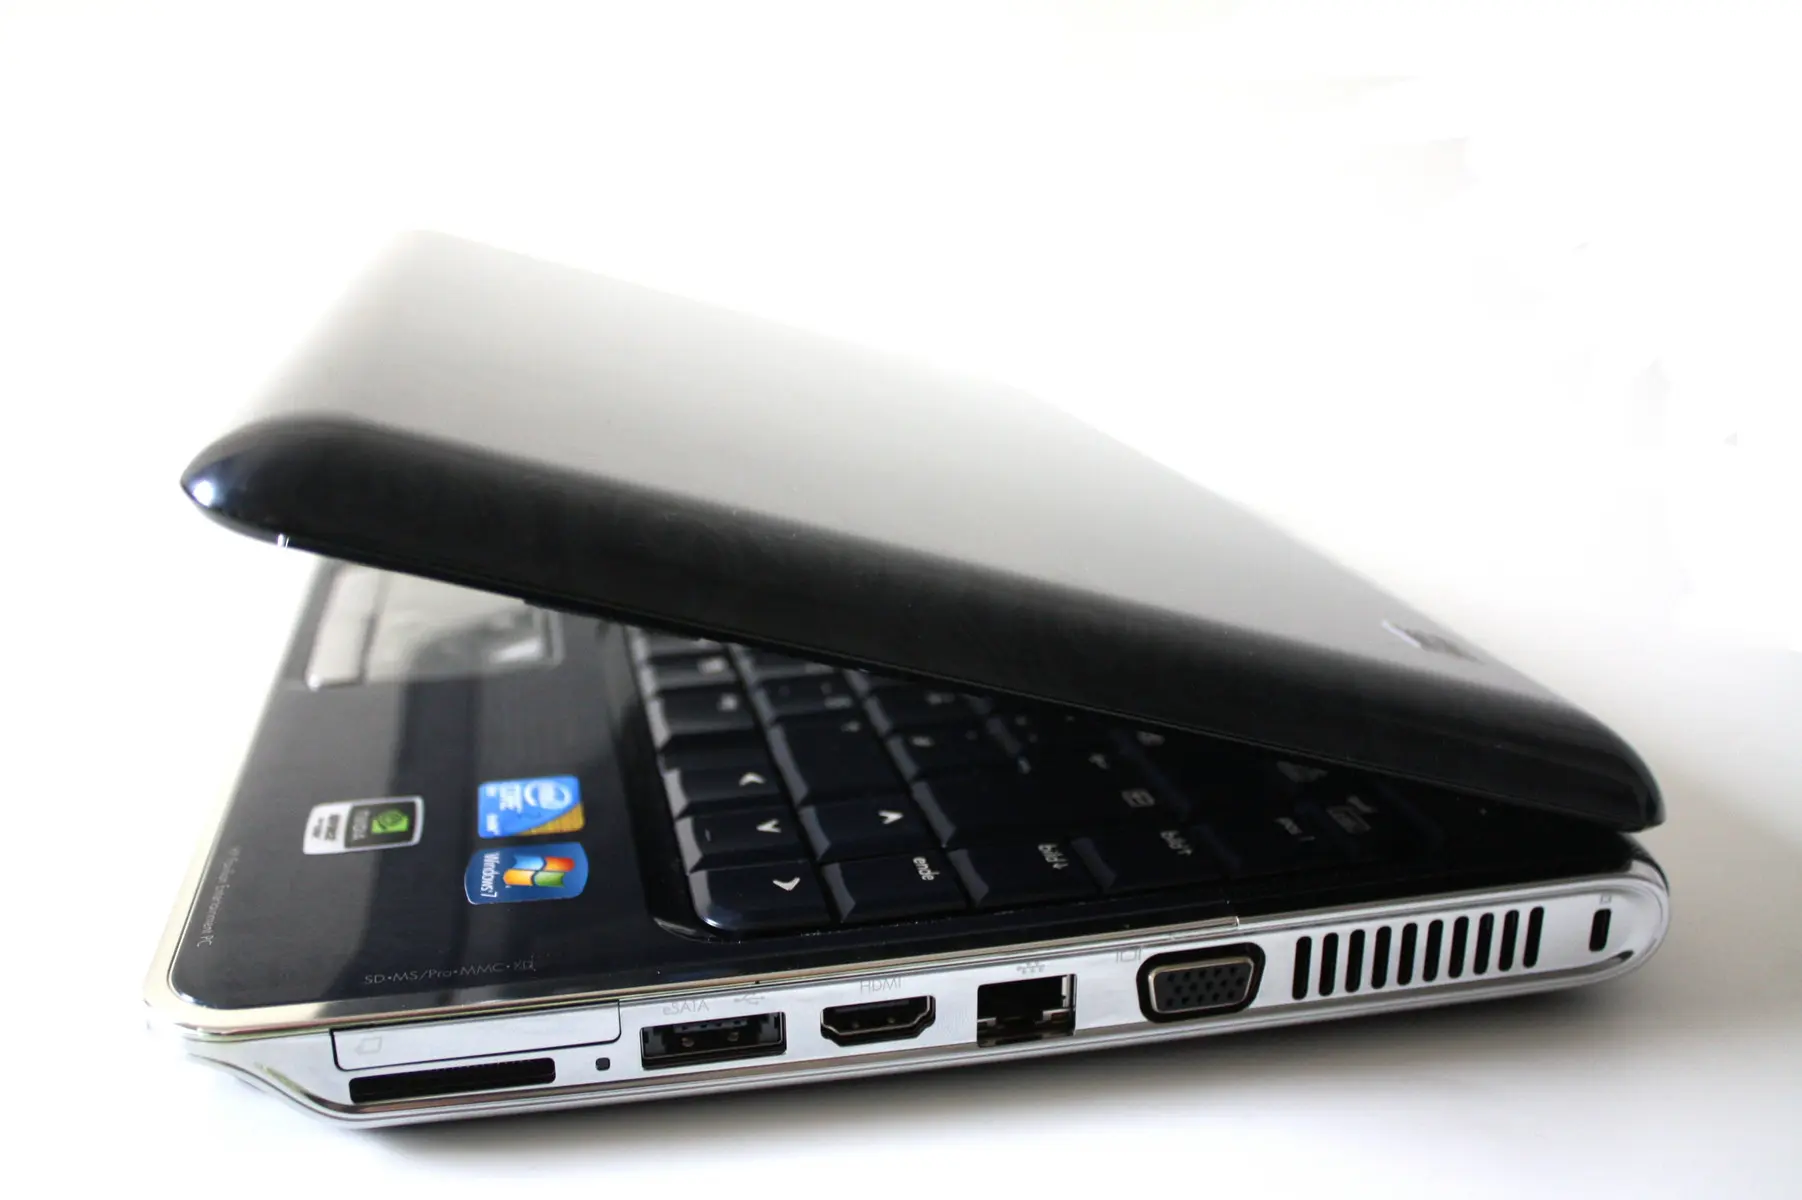 hewlett packard hp pavilion dv3 notebook pc - What are the specs of the HP Pavilion DV3 core i5